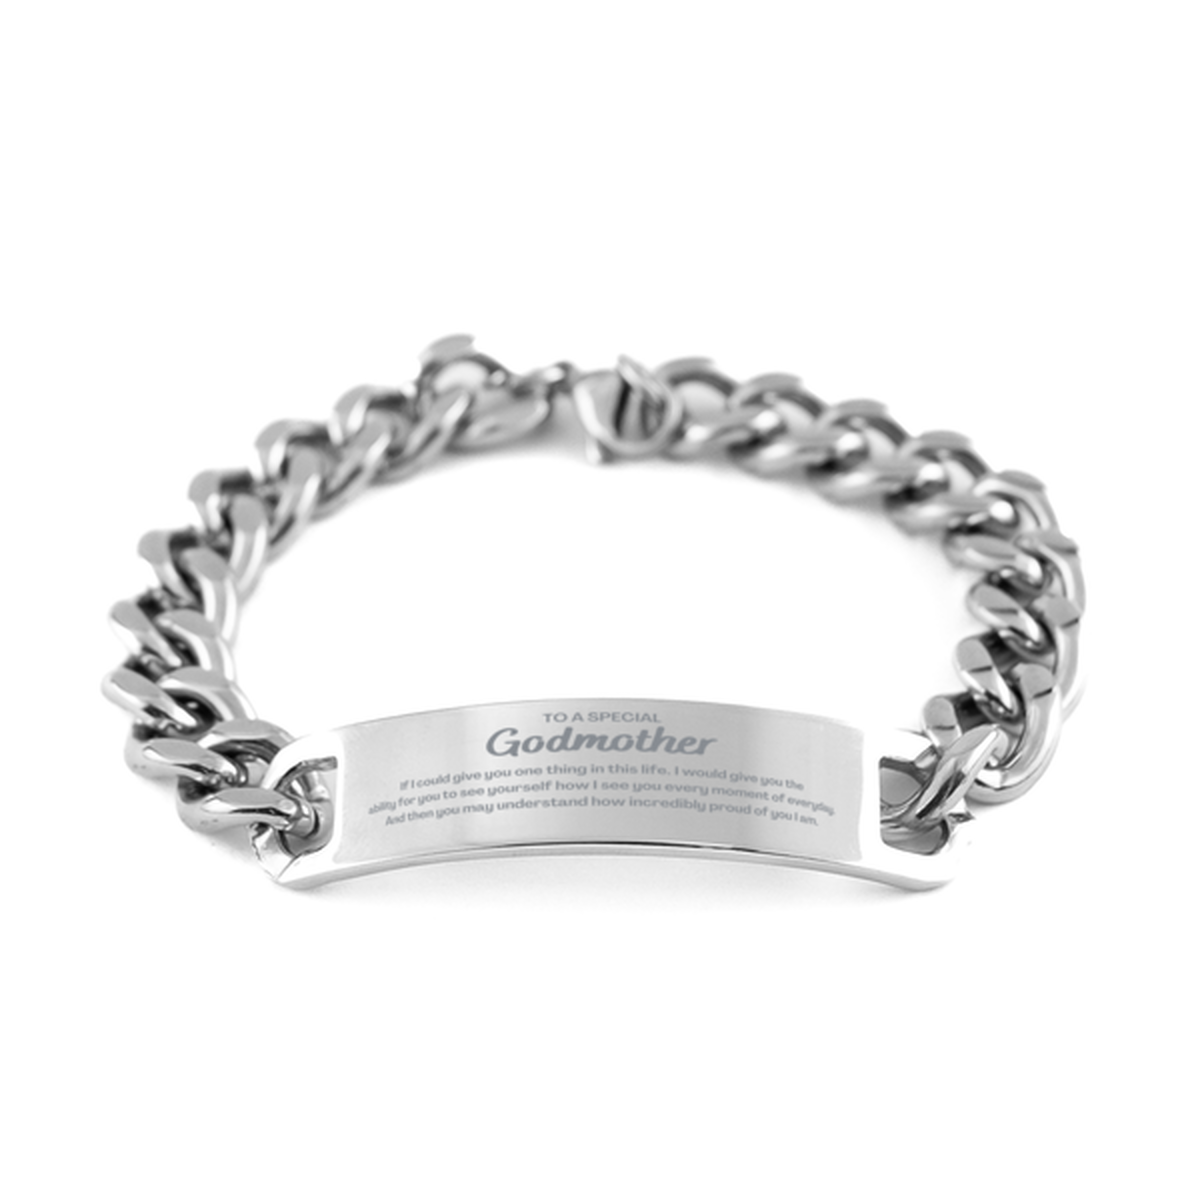 To My Godmother Cuban Chain Stainless Steel Bracelet, Gifts For Godmother Engraved, Inspirational Gifts for Christmas Birthday, Epic Gifts for Godmother To A Special Godmother how incredibly proud of you I am